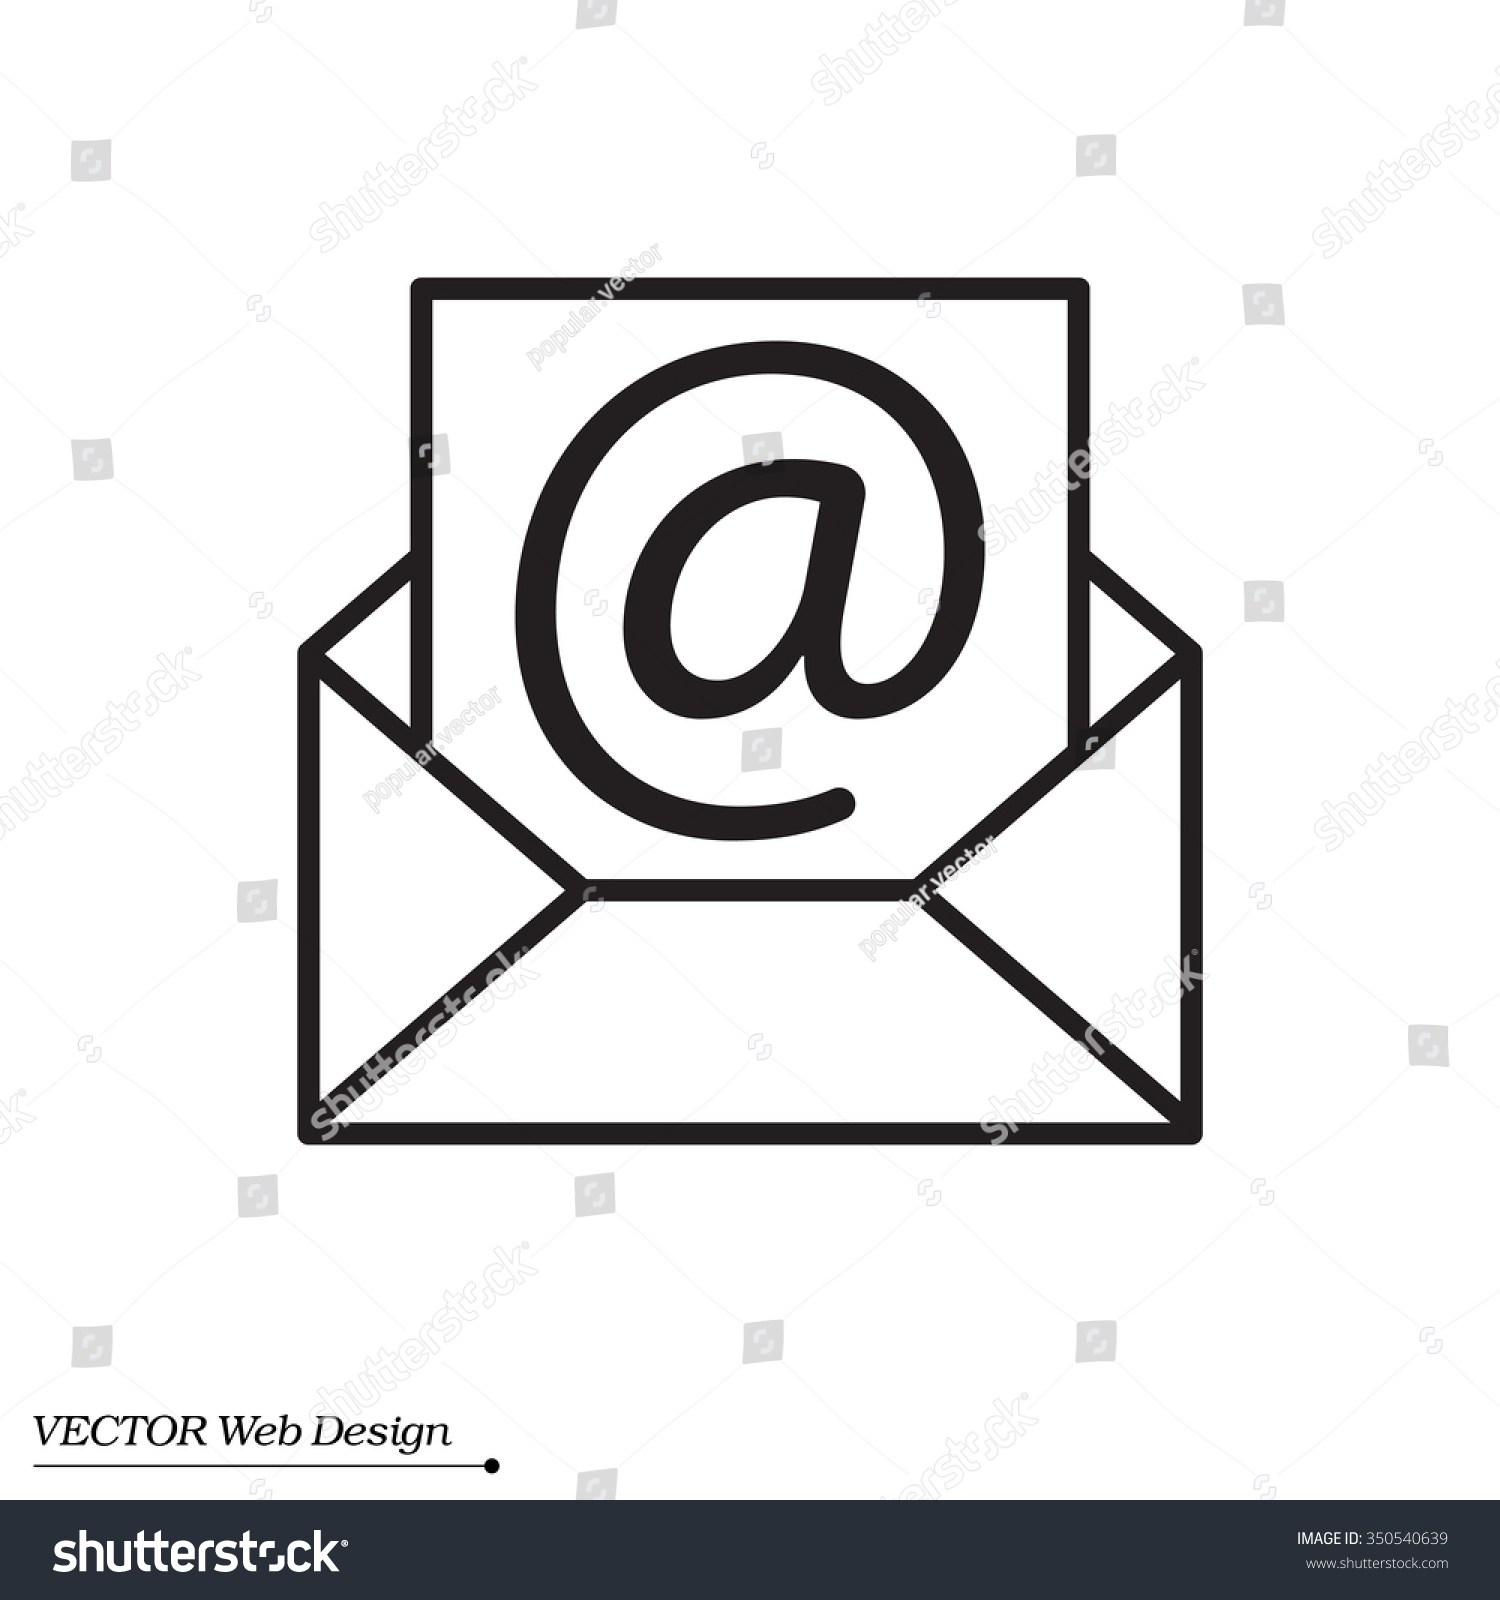 Email Icons - 7,970 free vector icons - Page 2